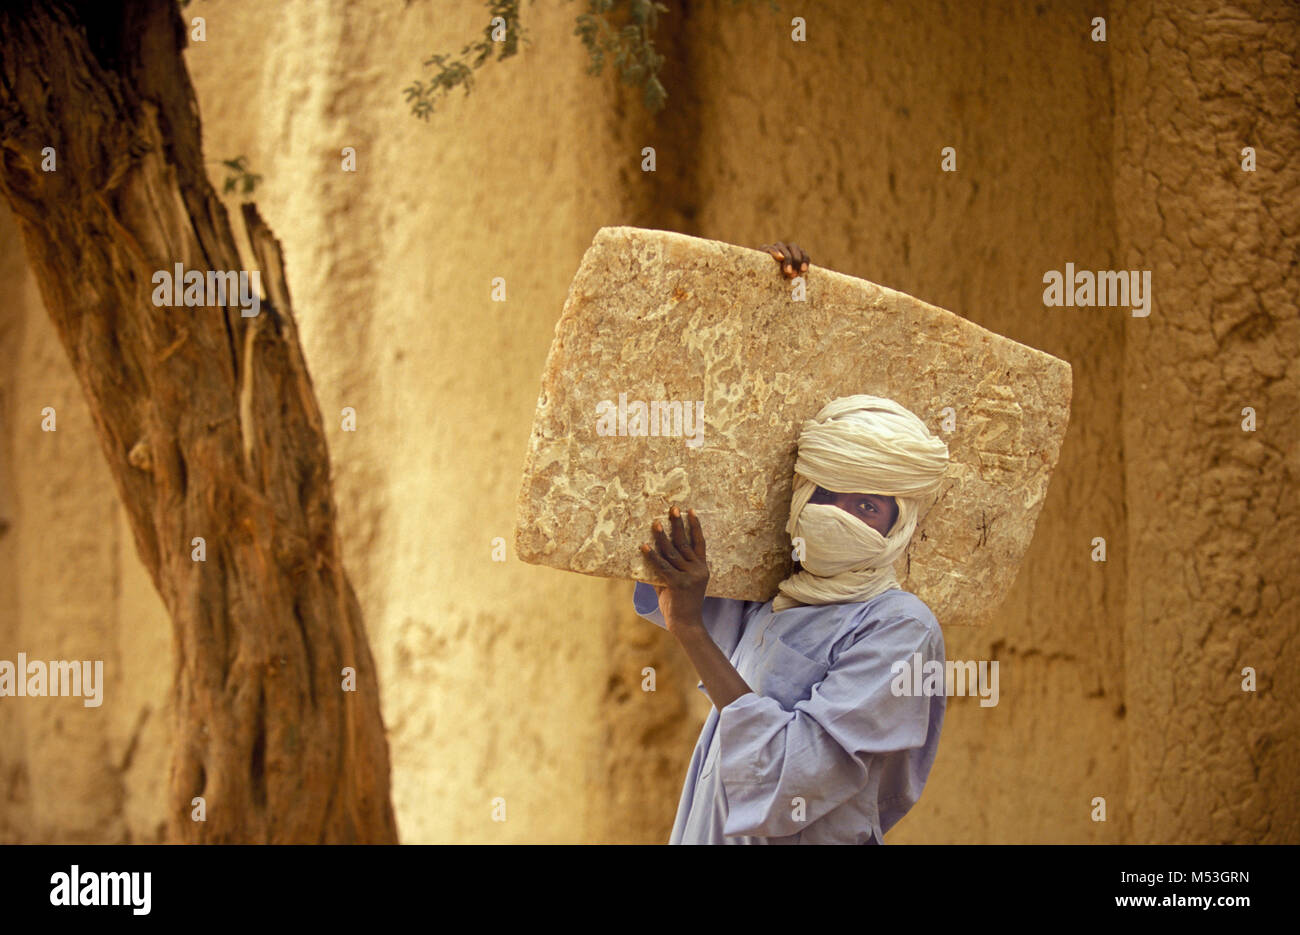 Mali. Timbuktu. Sahara desert. Sahel. Man carrying salt tablet on shoulder. The salt comes with camels from the salt mines of Taoudeni. Stock Photo